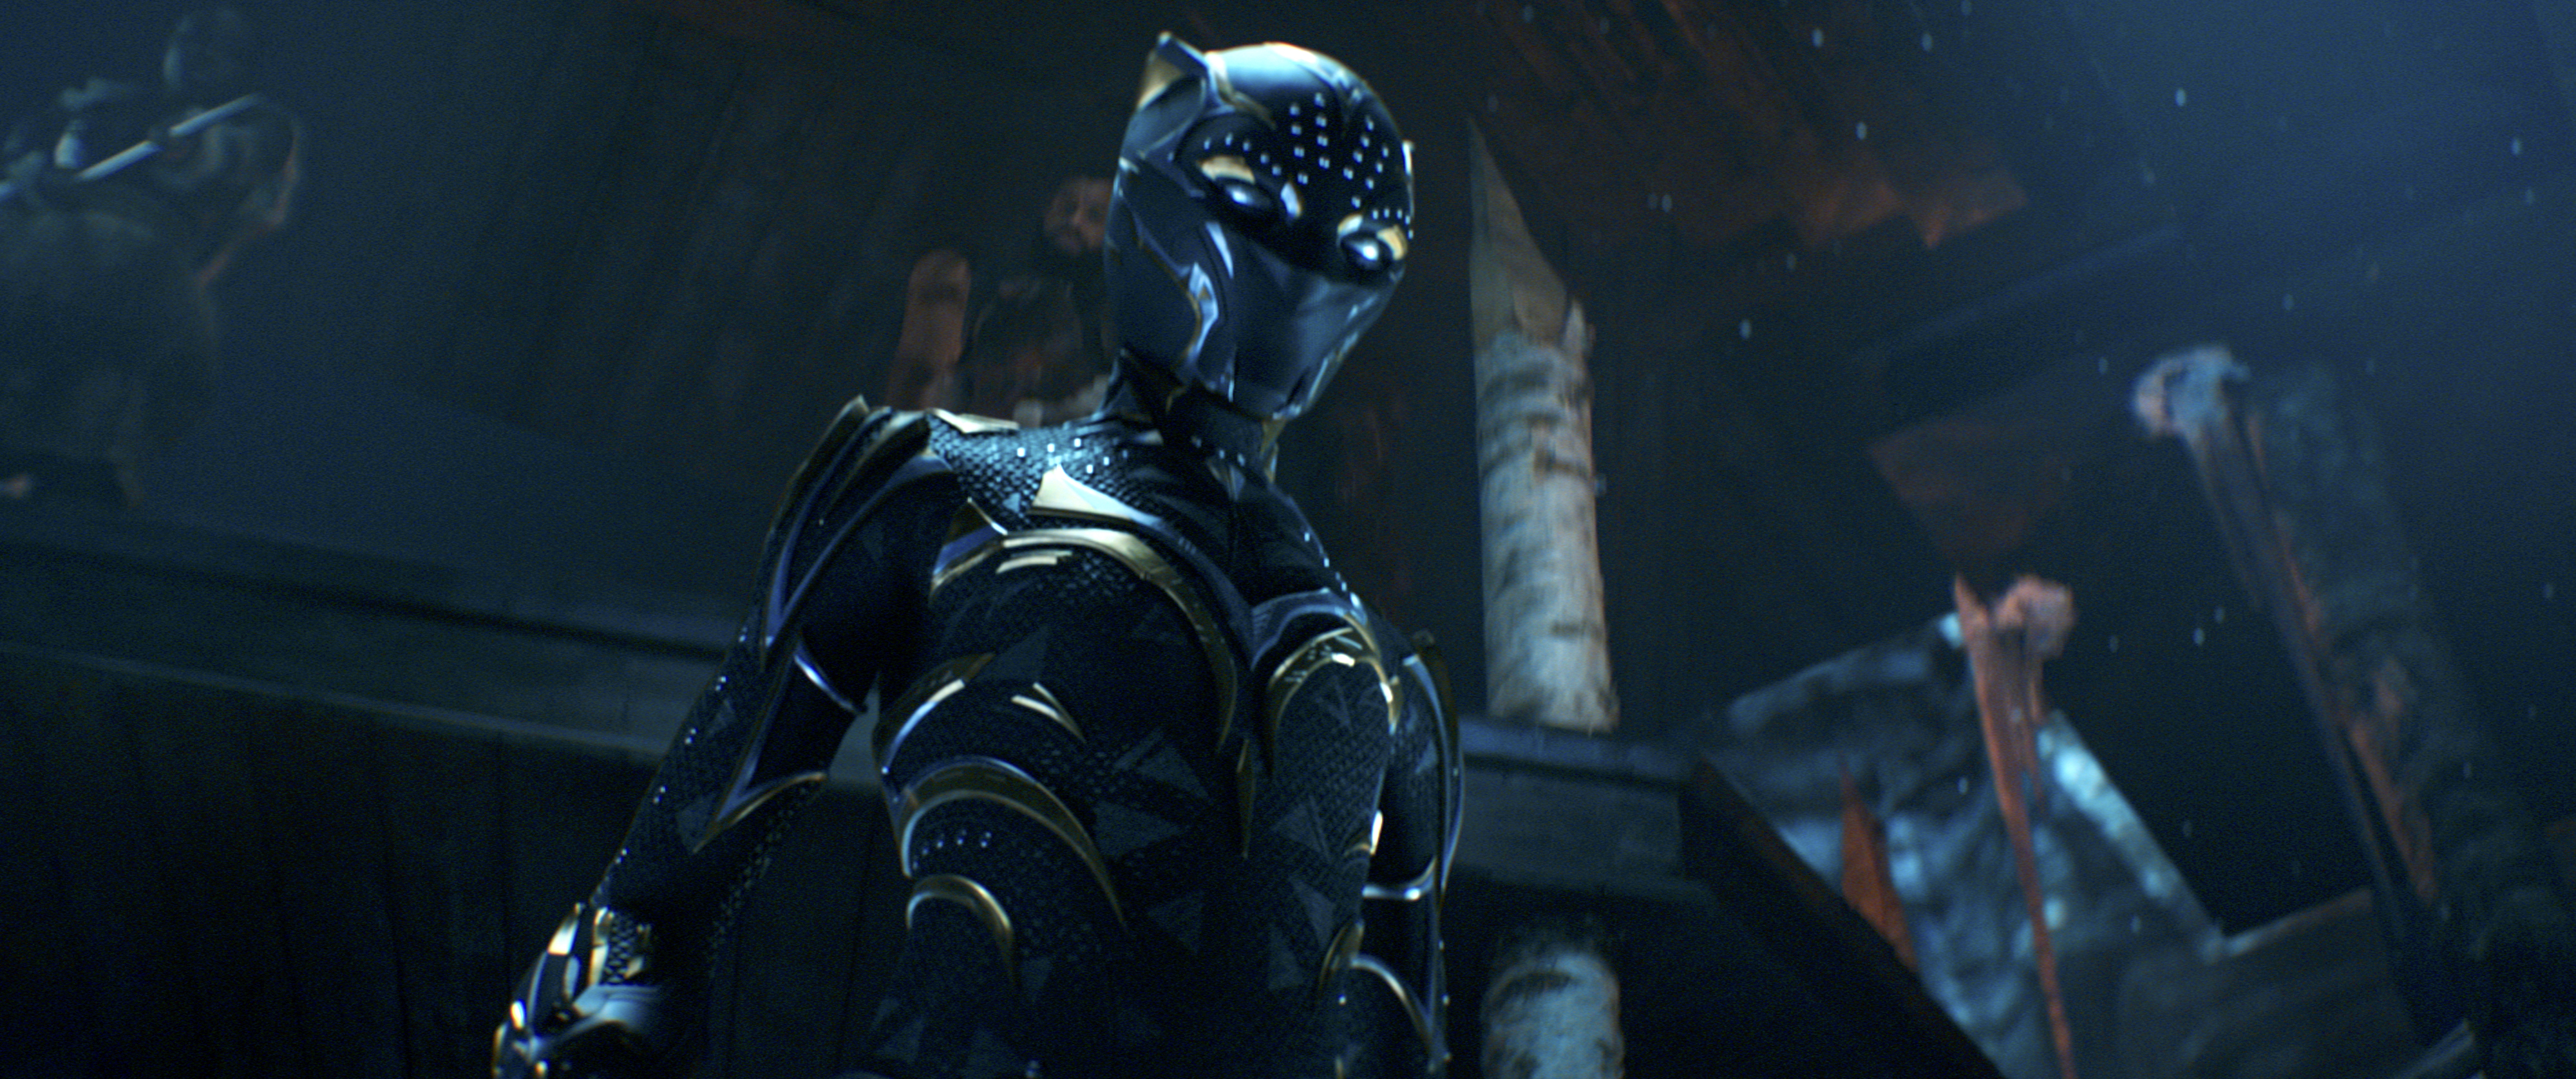 A female Black Panther stands up in a suit with a bejeweled mask